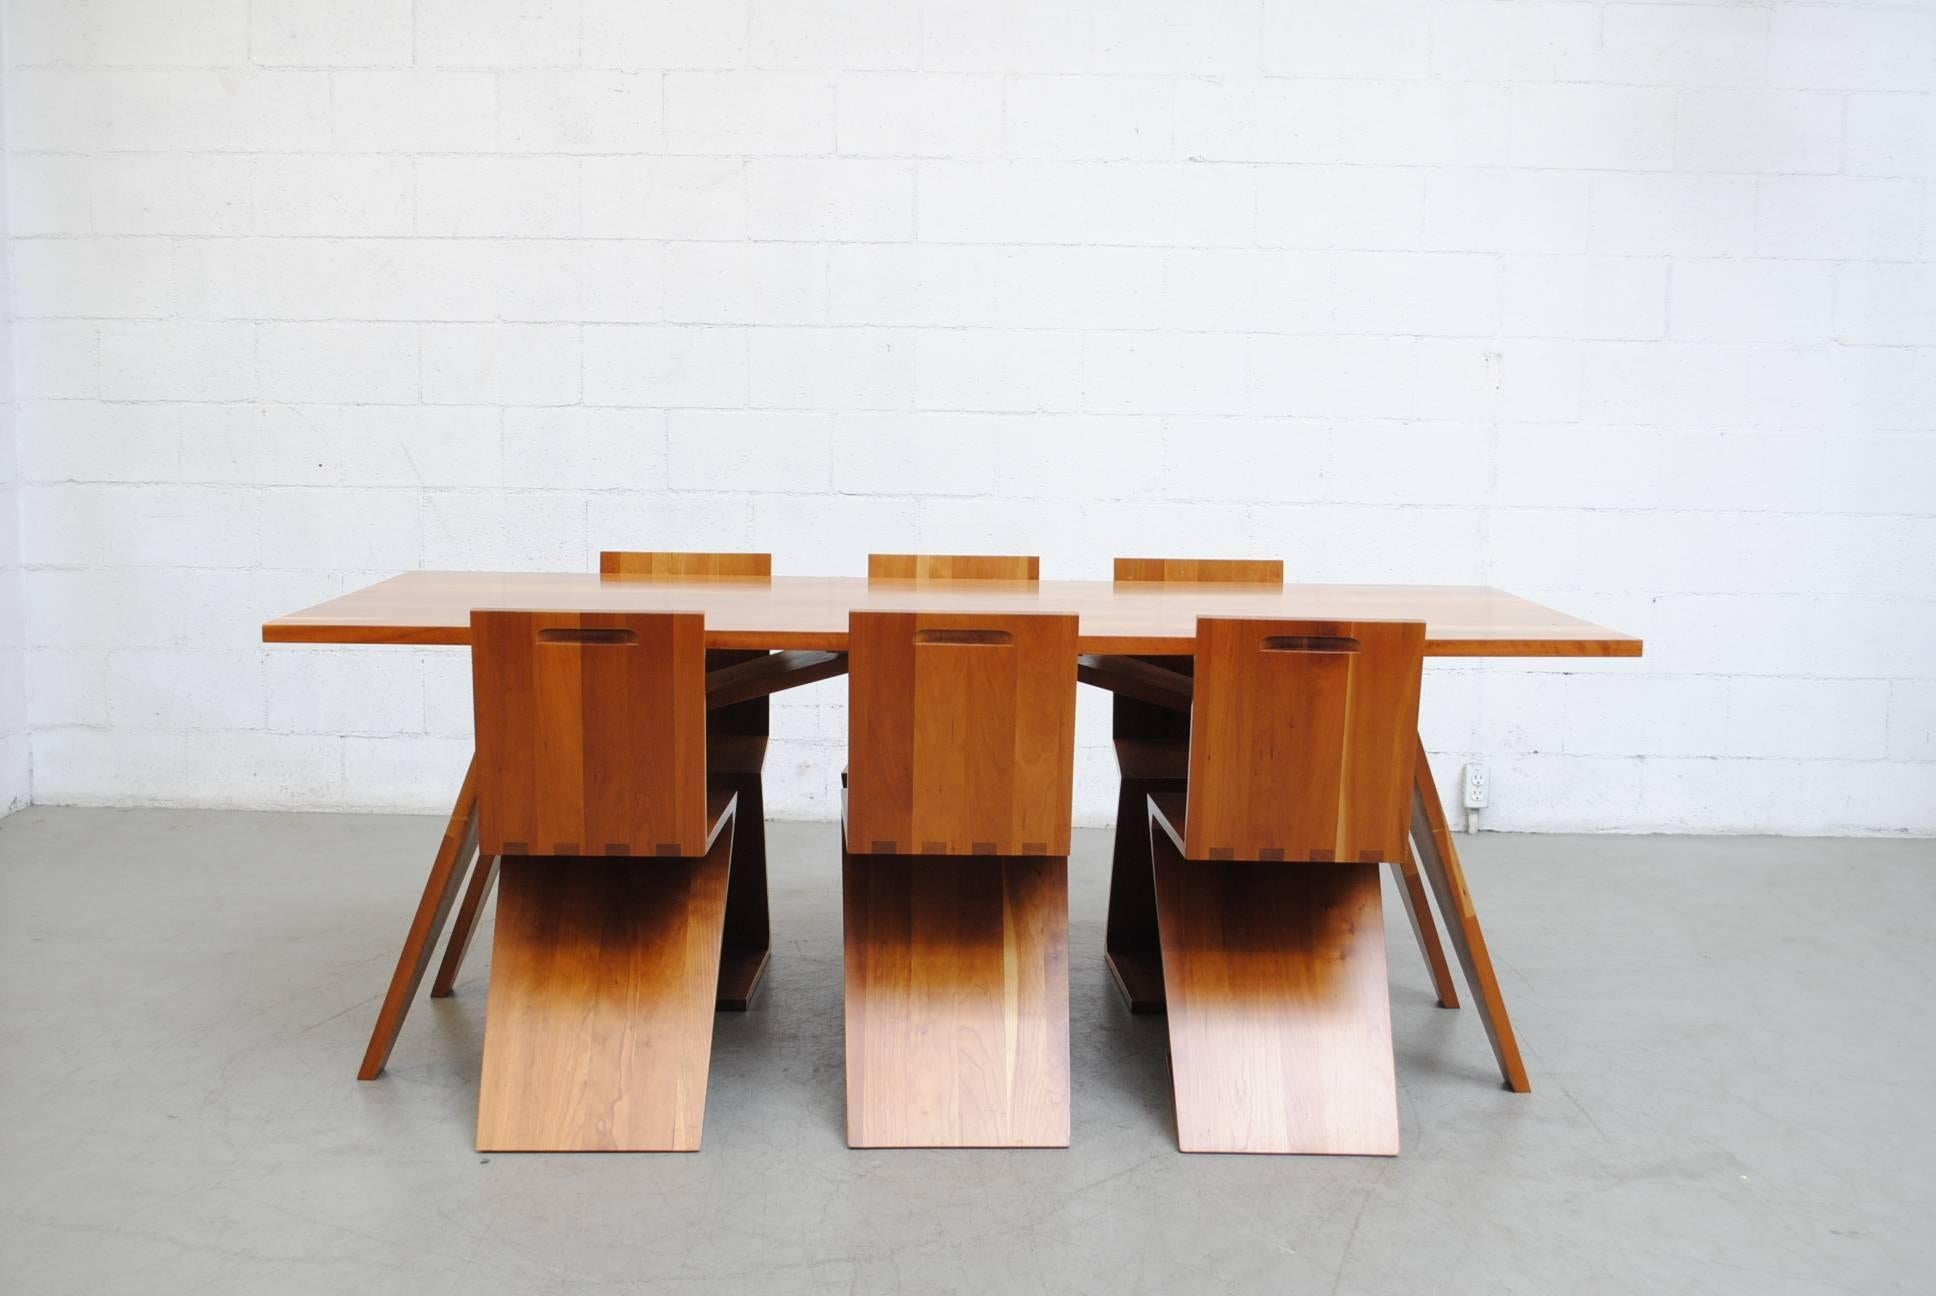 A fine display of Dutch Design and craftsmanship in this gorgeous solid cheerywood dining set as designed by Gerrit Rietveld and handmade in the early 1980s consists of a large table with six matching 'Z' shaped chairs. This set was custom ordered